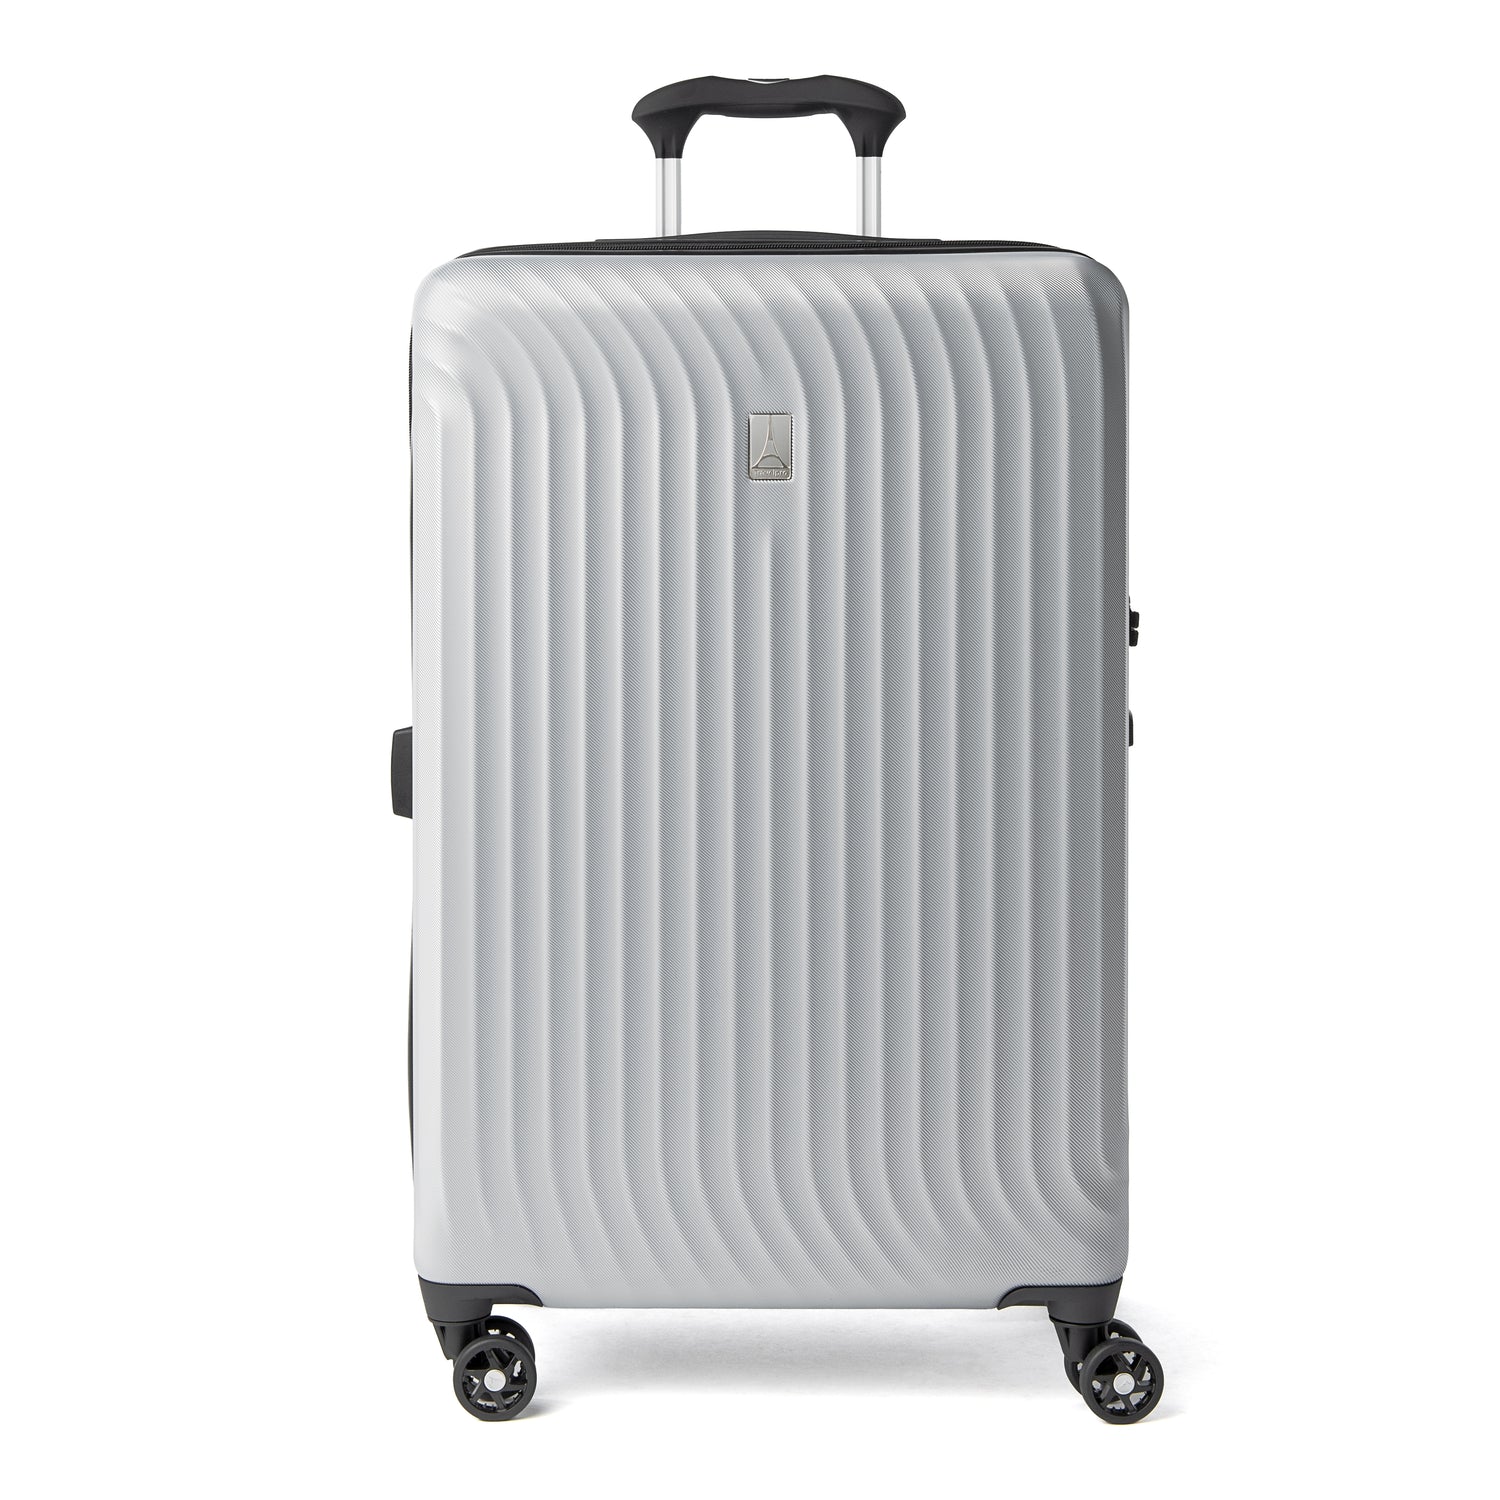 Travelpro Maxlite Air Medium Check-in Expandable Hardside Spinner Luggage - Metallic Silver